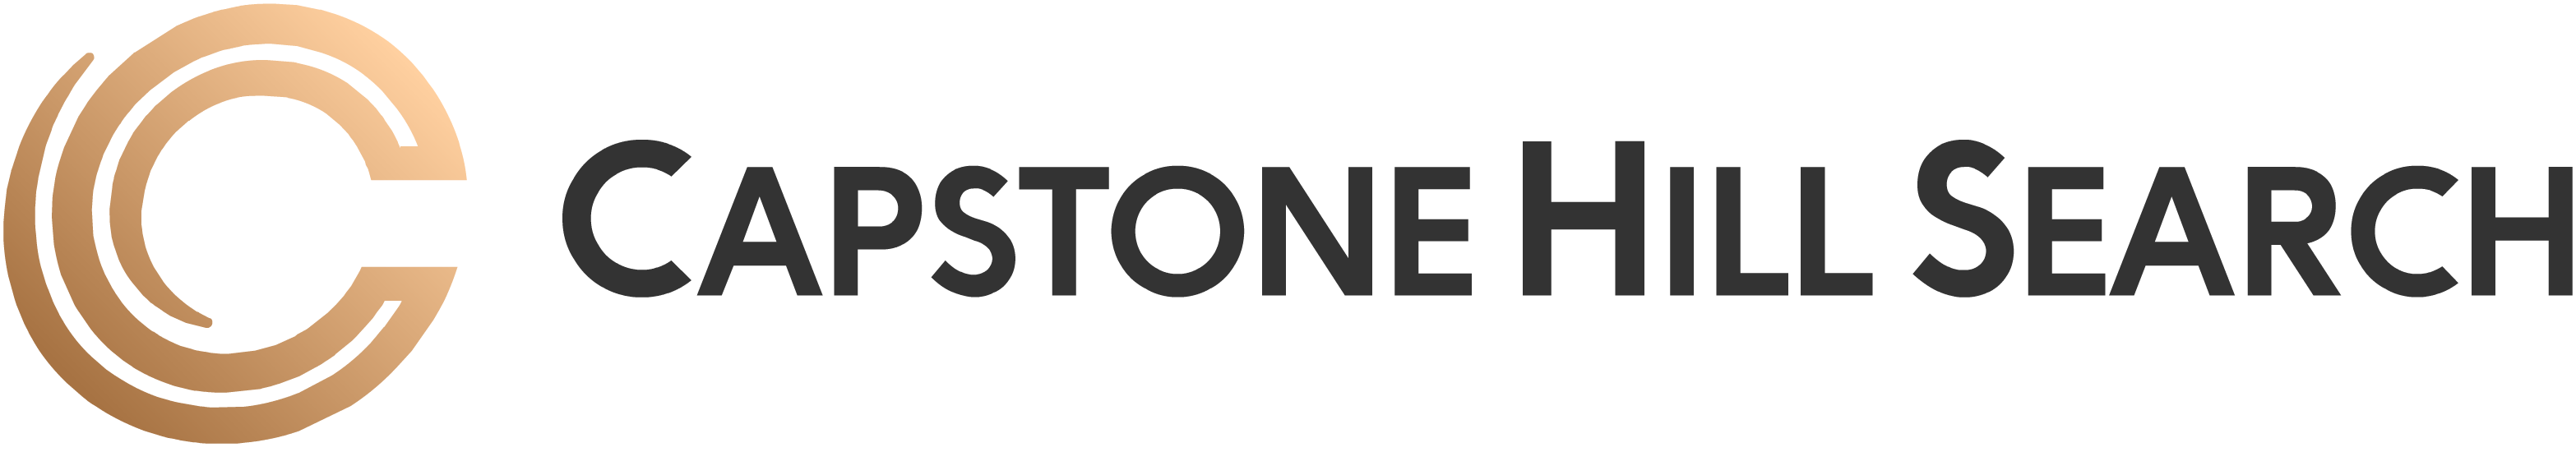 capstone-hill-search-logo.png